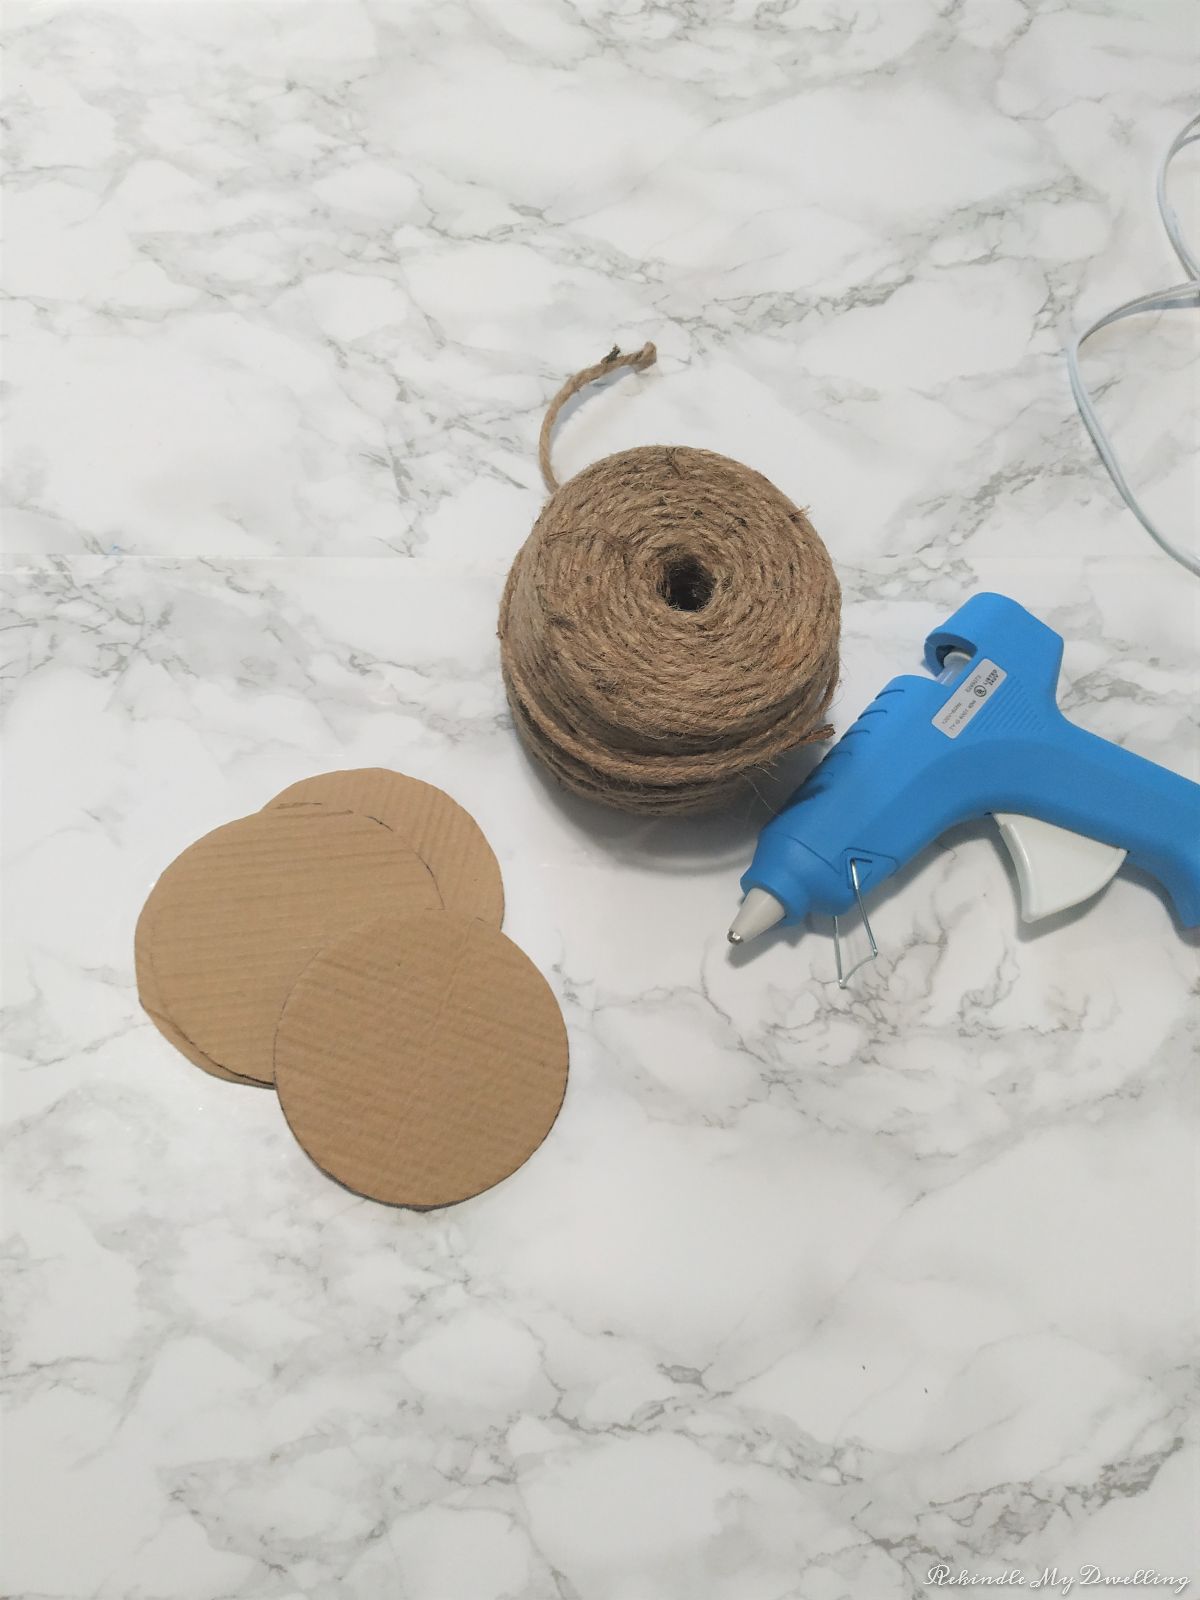 Materials needed to make DIY rope coasters, including cardboard cut outs, rope and a glue gun.